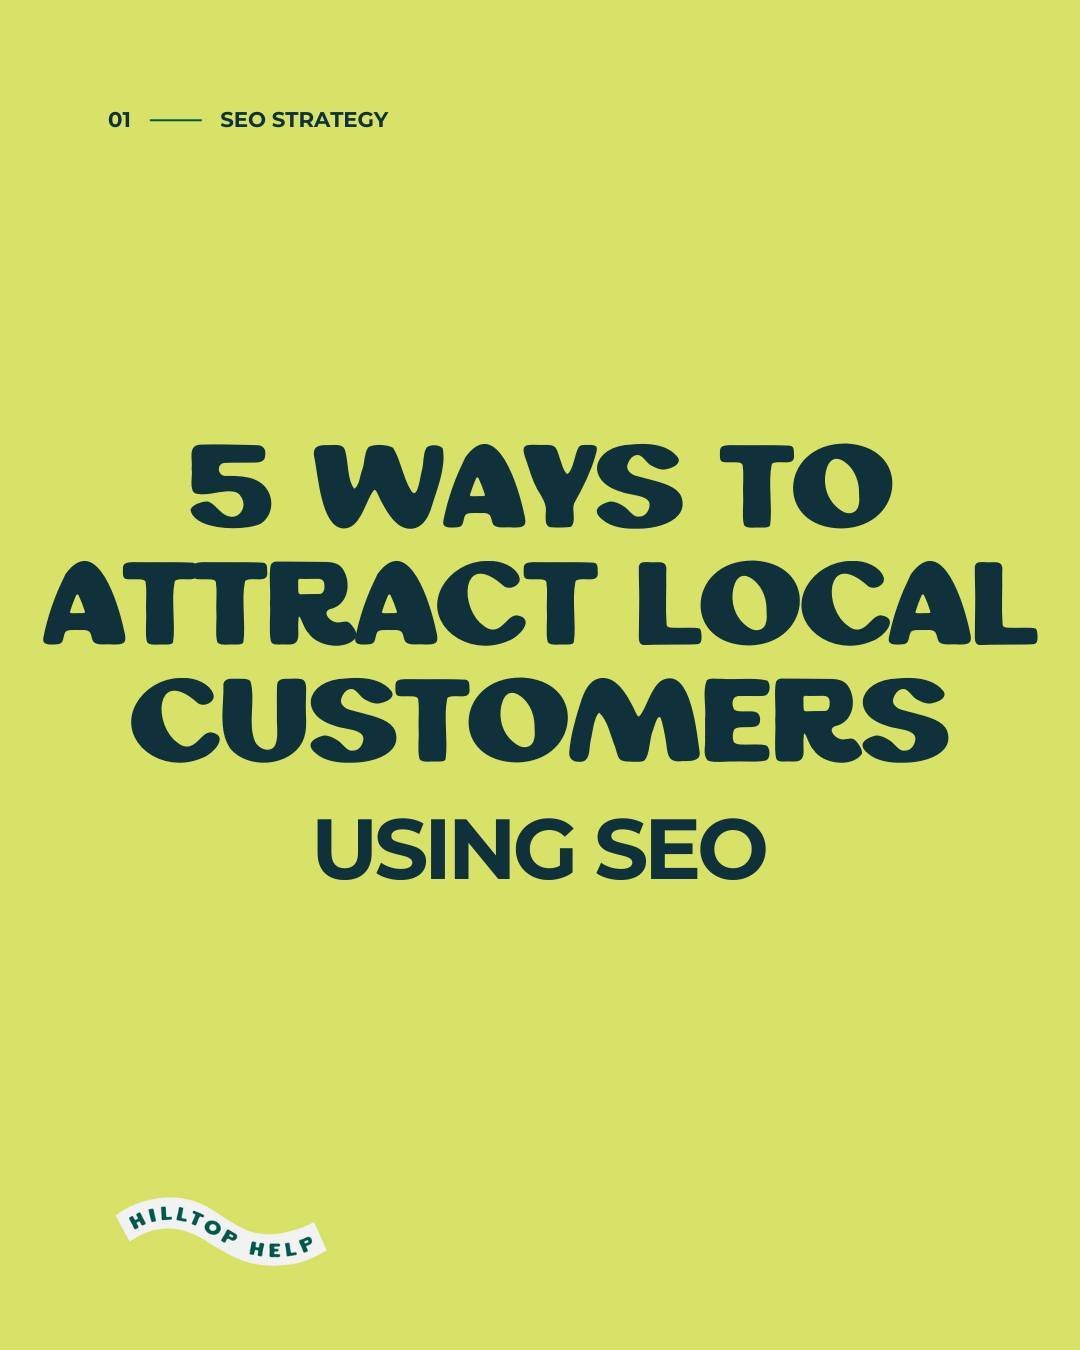 Calling all local businesses! 📣⁣
⁣
Are you wondering how to attract more traffic to your therapy office or shop? These SEO strategies will help! ⁣
⁣
If you'd like to learn more, comment &quot;LOCAL&quot; and I'll send you my free guide with 3 SEO ti